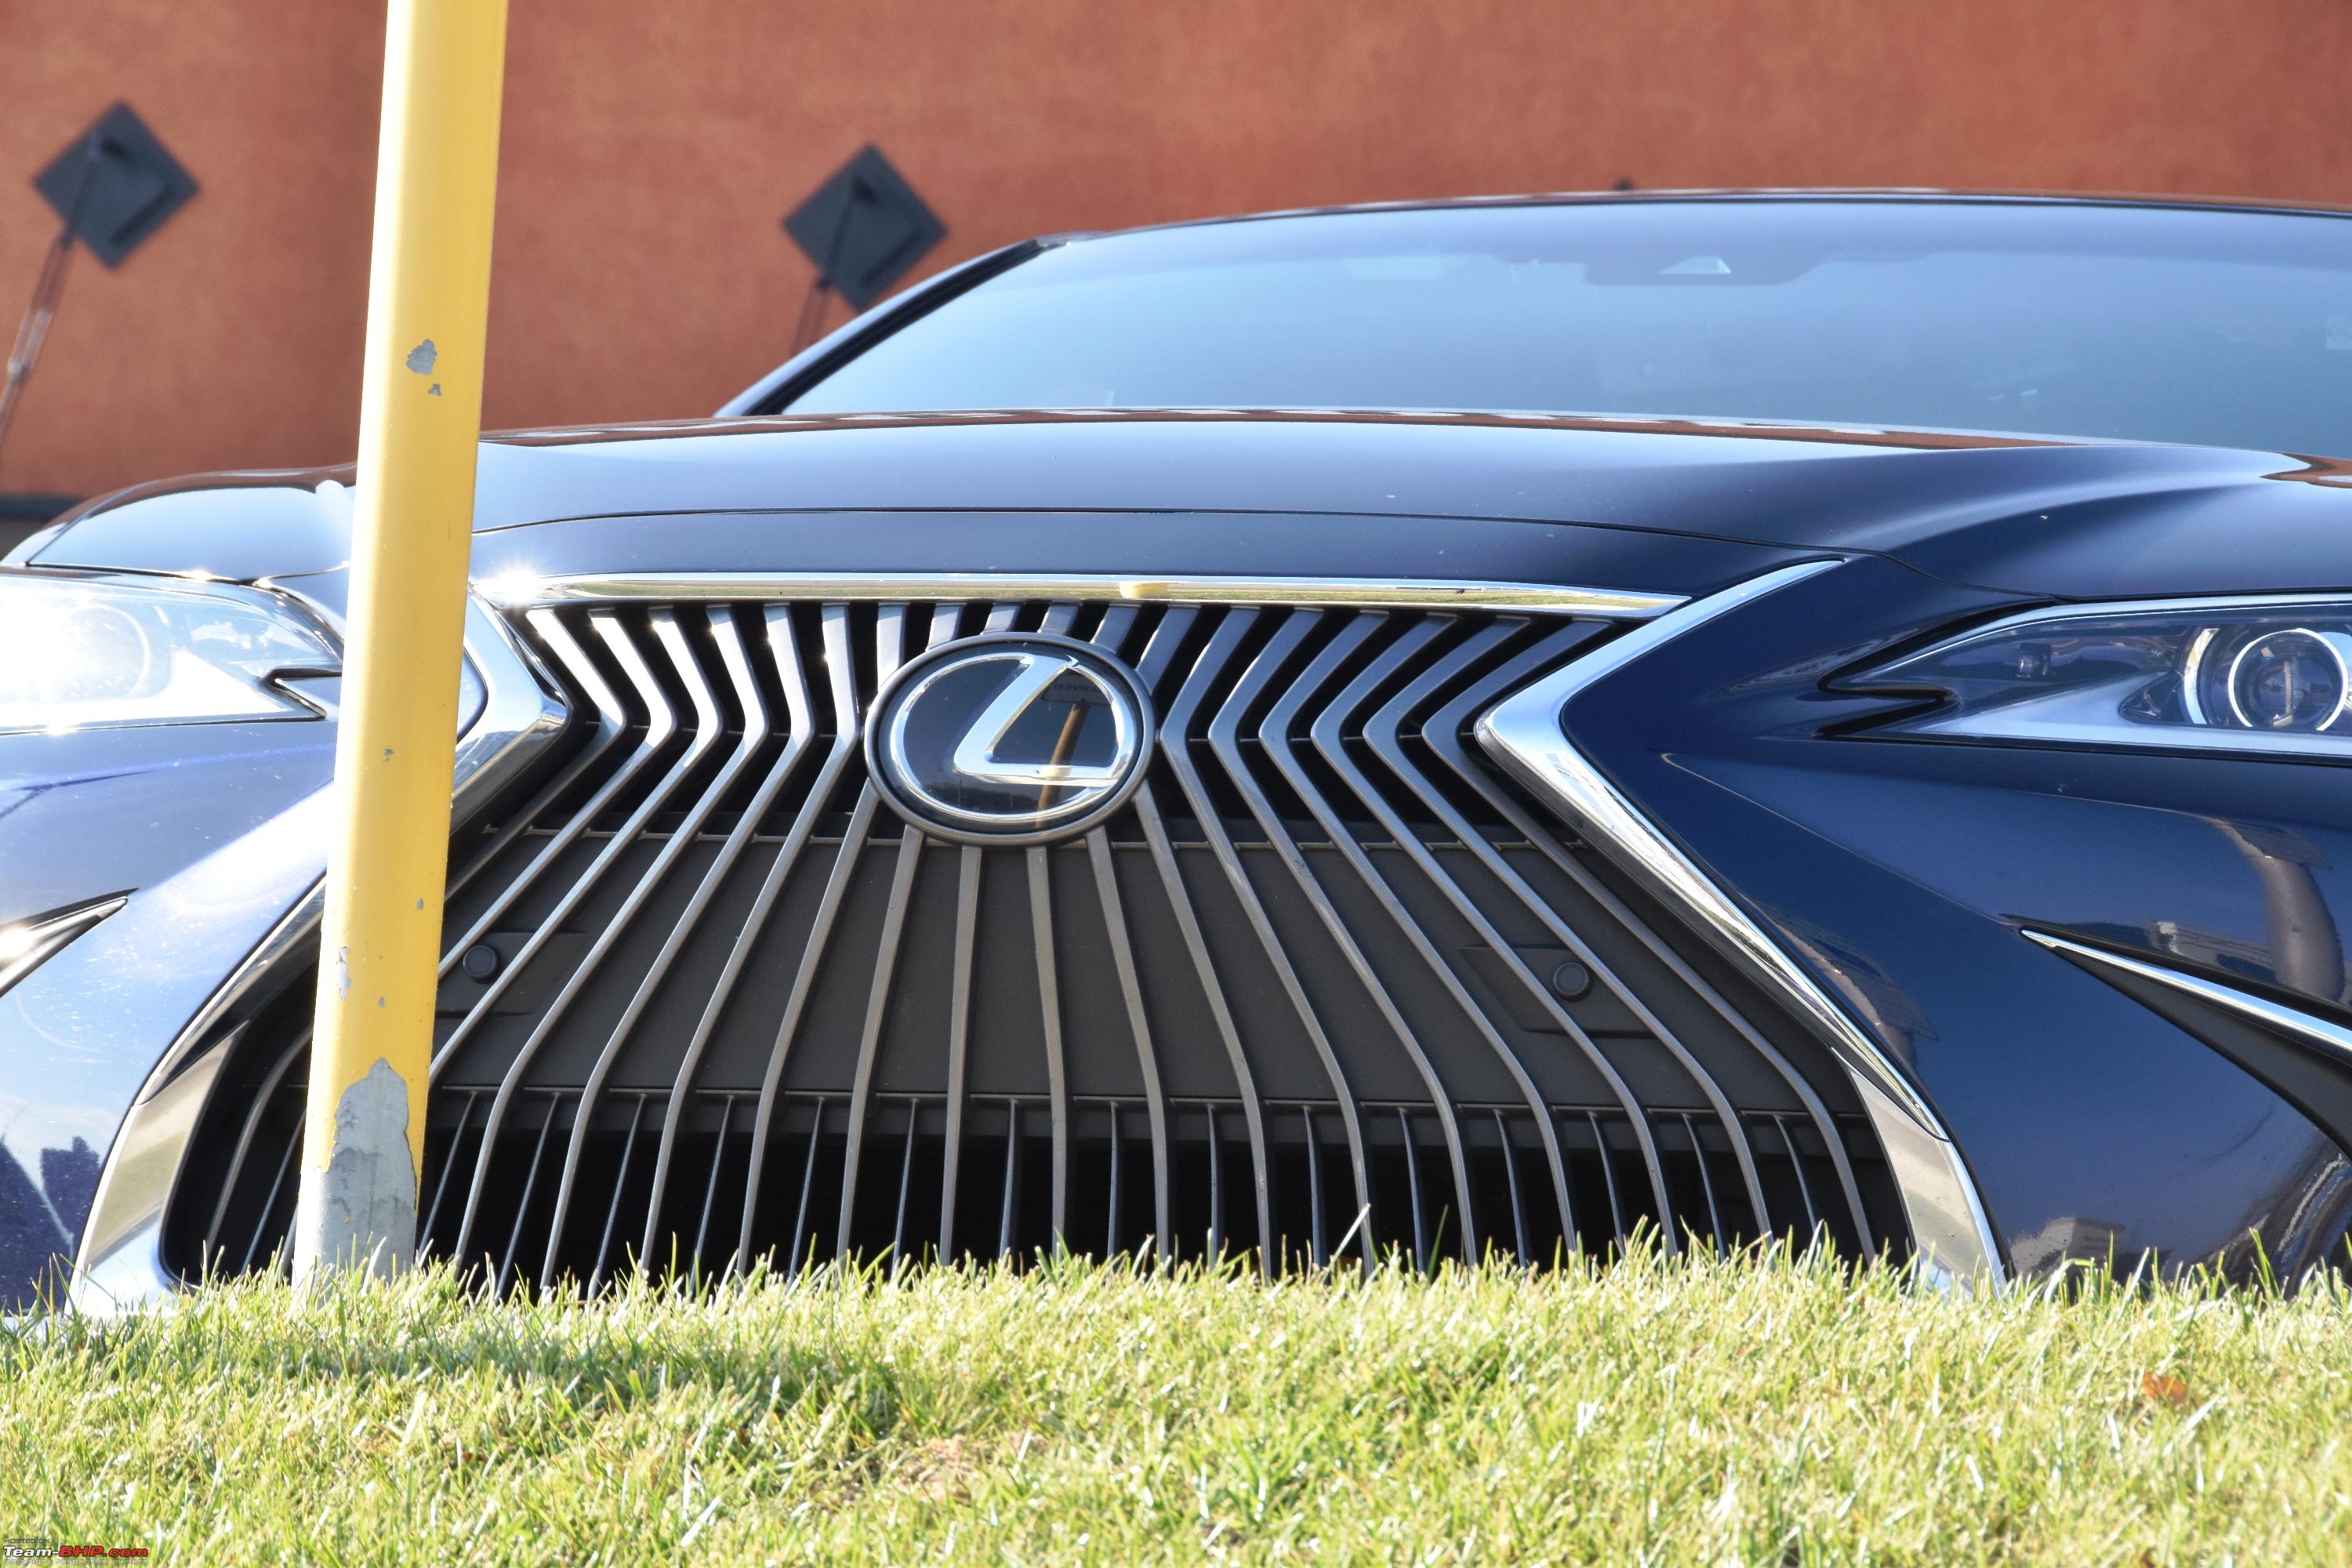 Aftensmad løn Hysterisk morsom Lexus could tone down its spindle grille size; return to a more  conservative look - Team-BHP